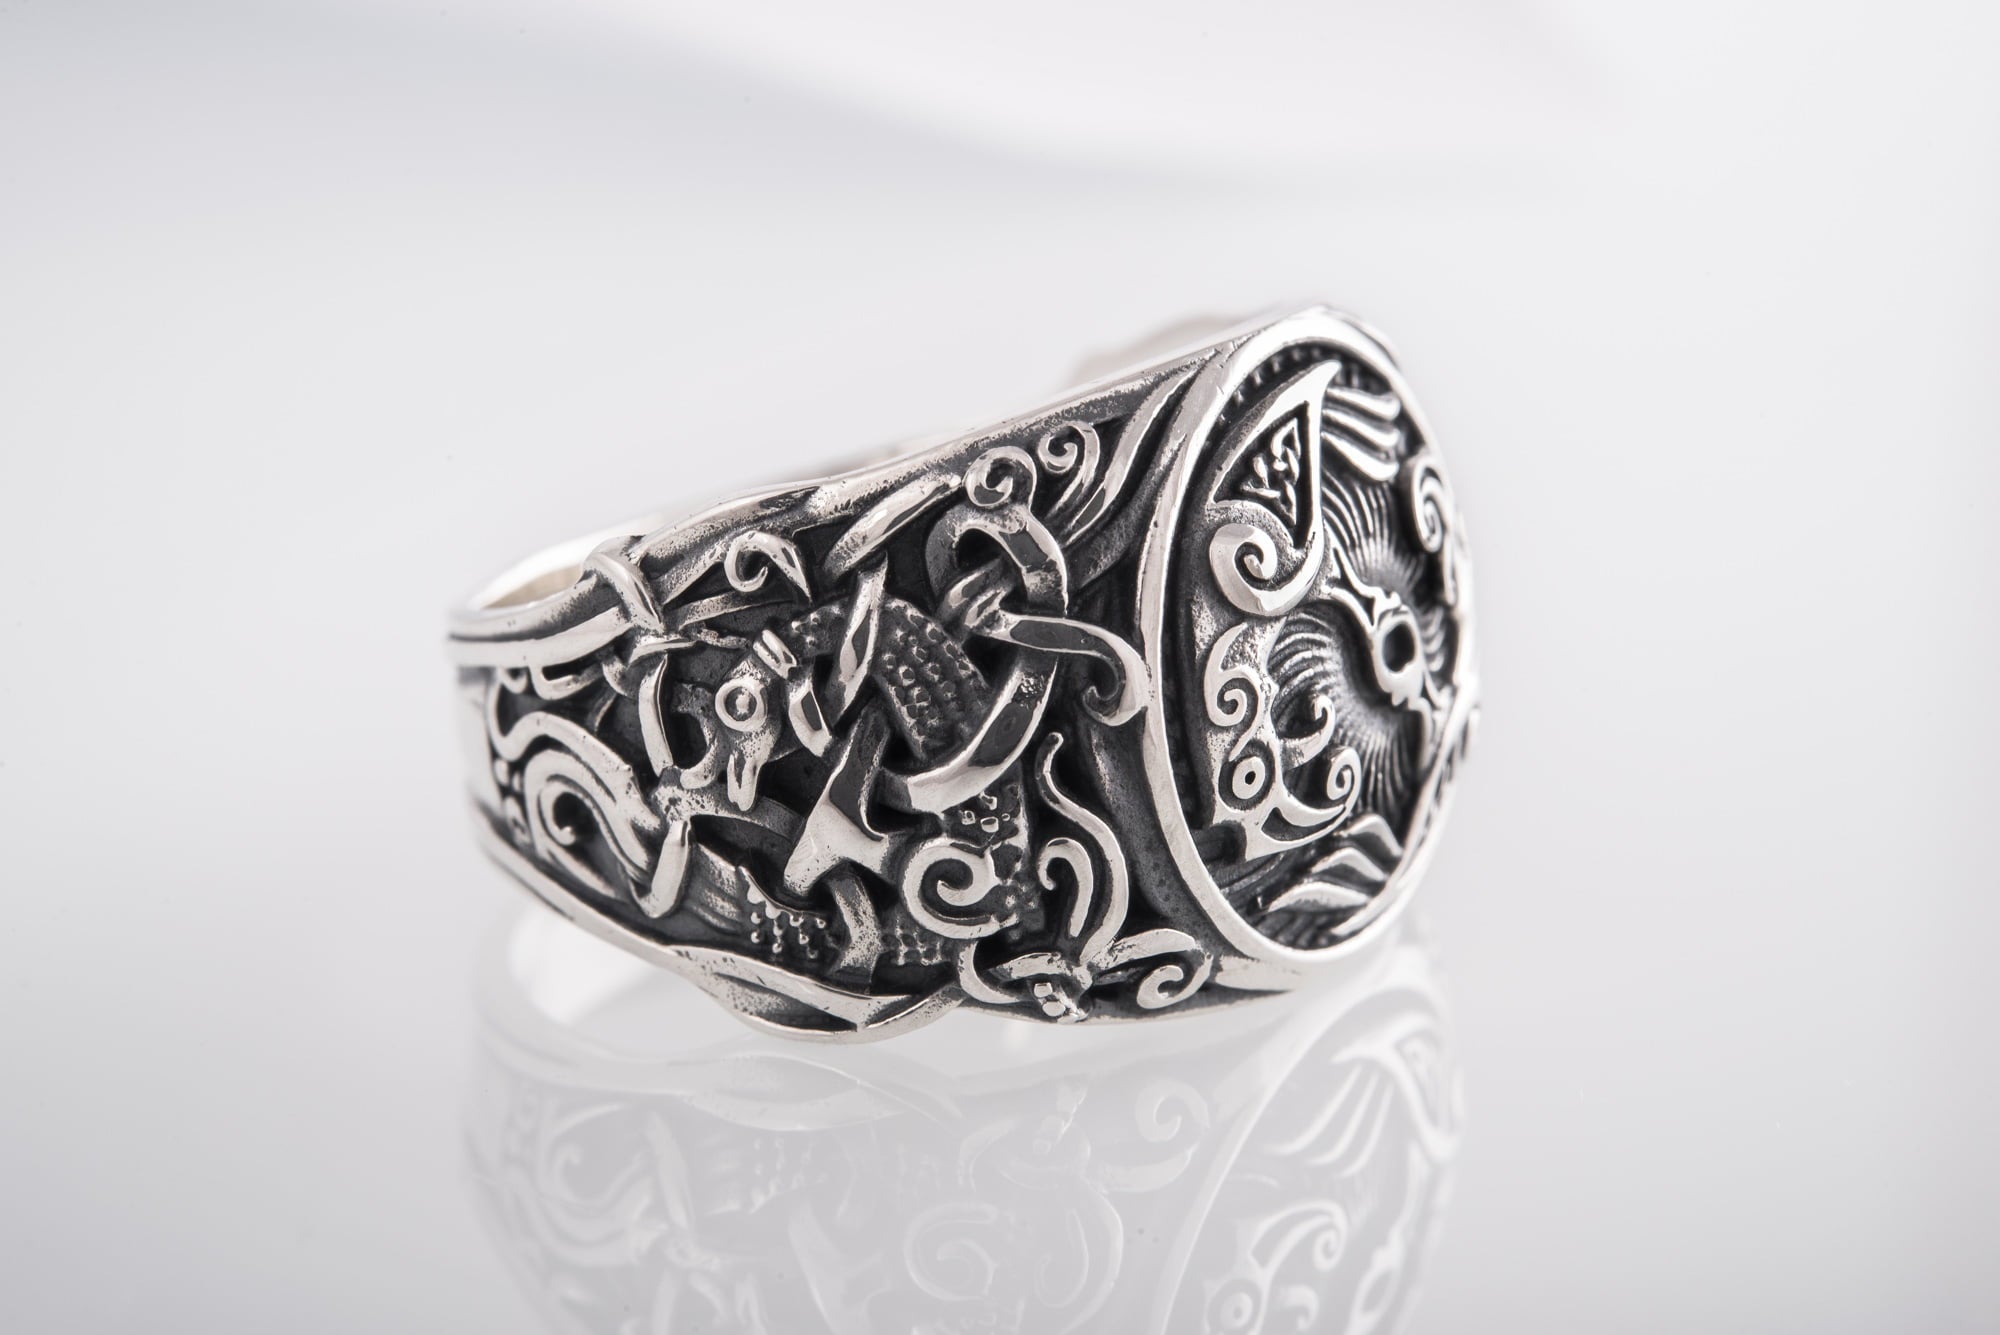 Raven Ring with Mammen Ornament Sterling Silver Viking Jewelry - vikingworkshop